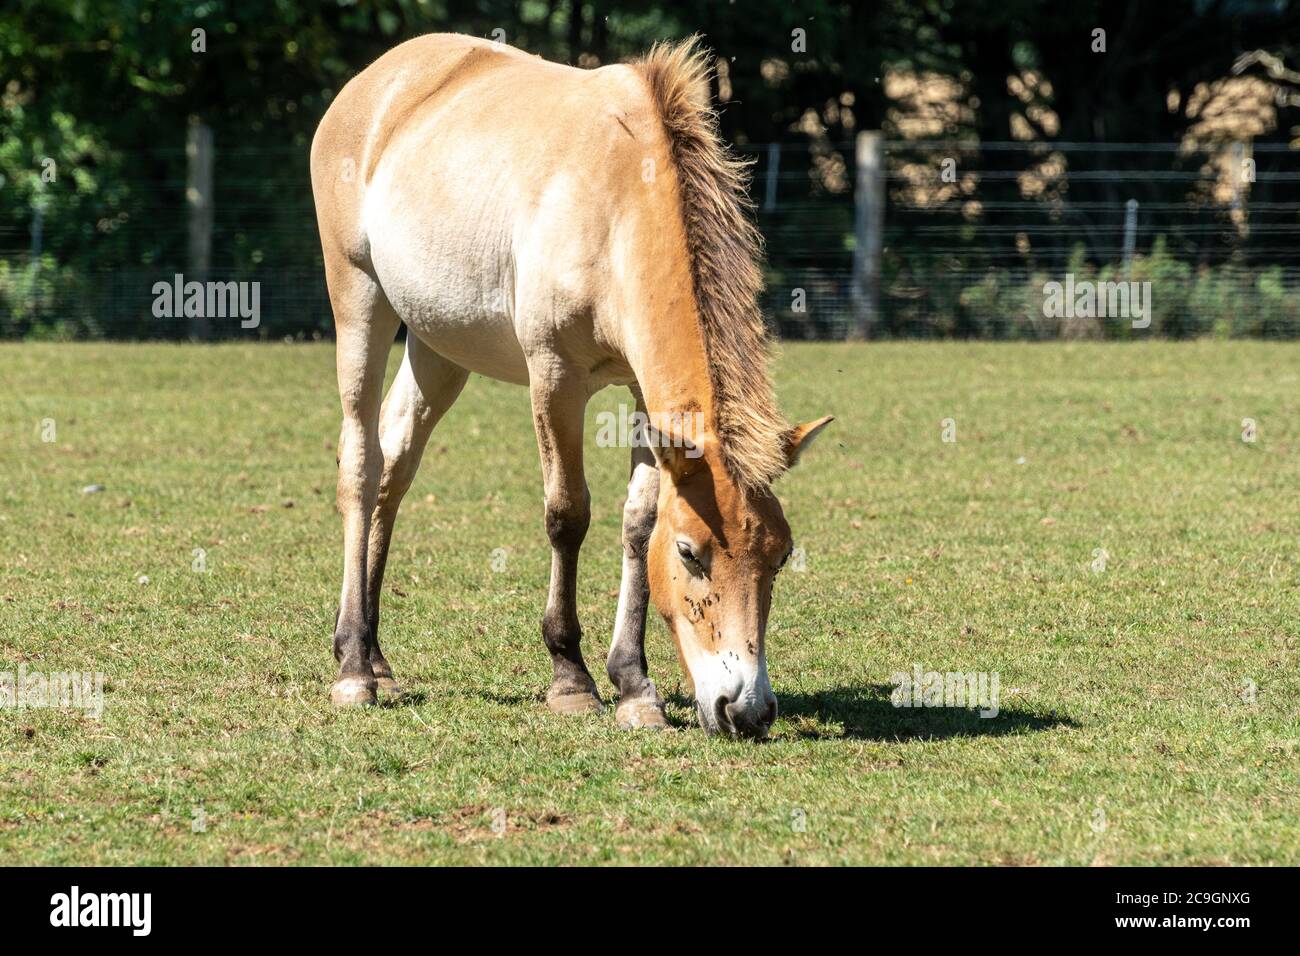 Przewalski’s horse (Equus ferus) at Marwell Zoo, UK, part of a conservation programme. It is the last remaining true species of wild horse Stock Photo